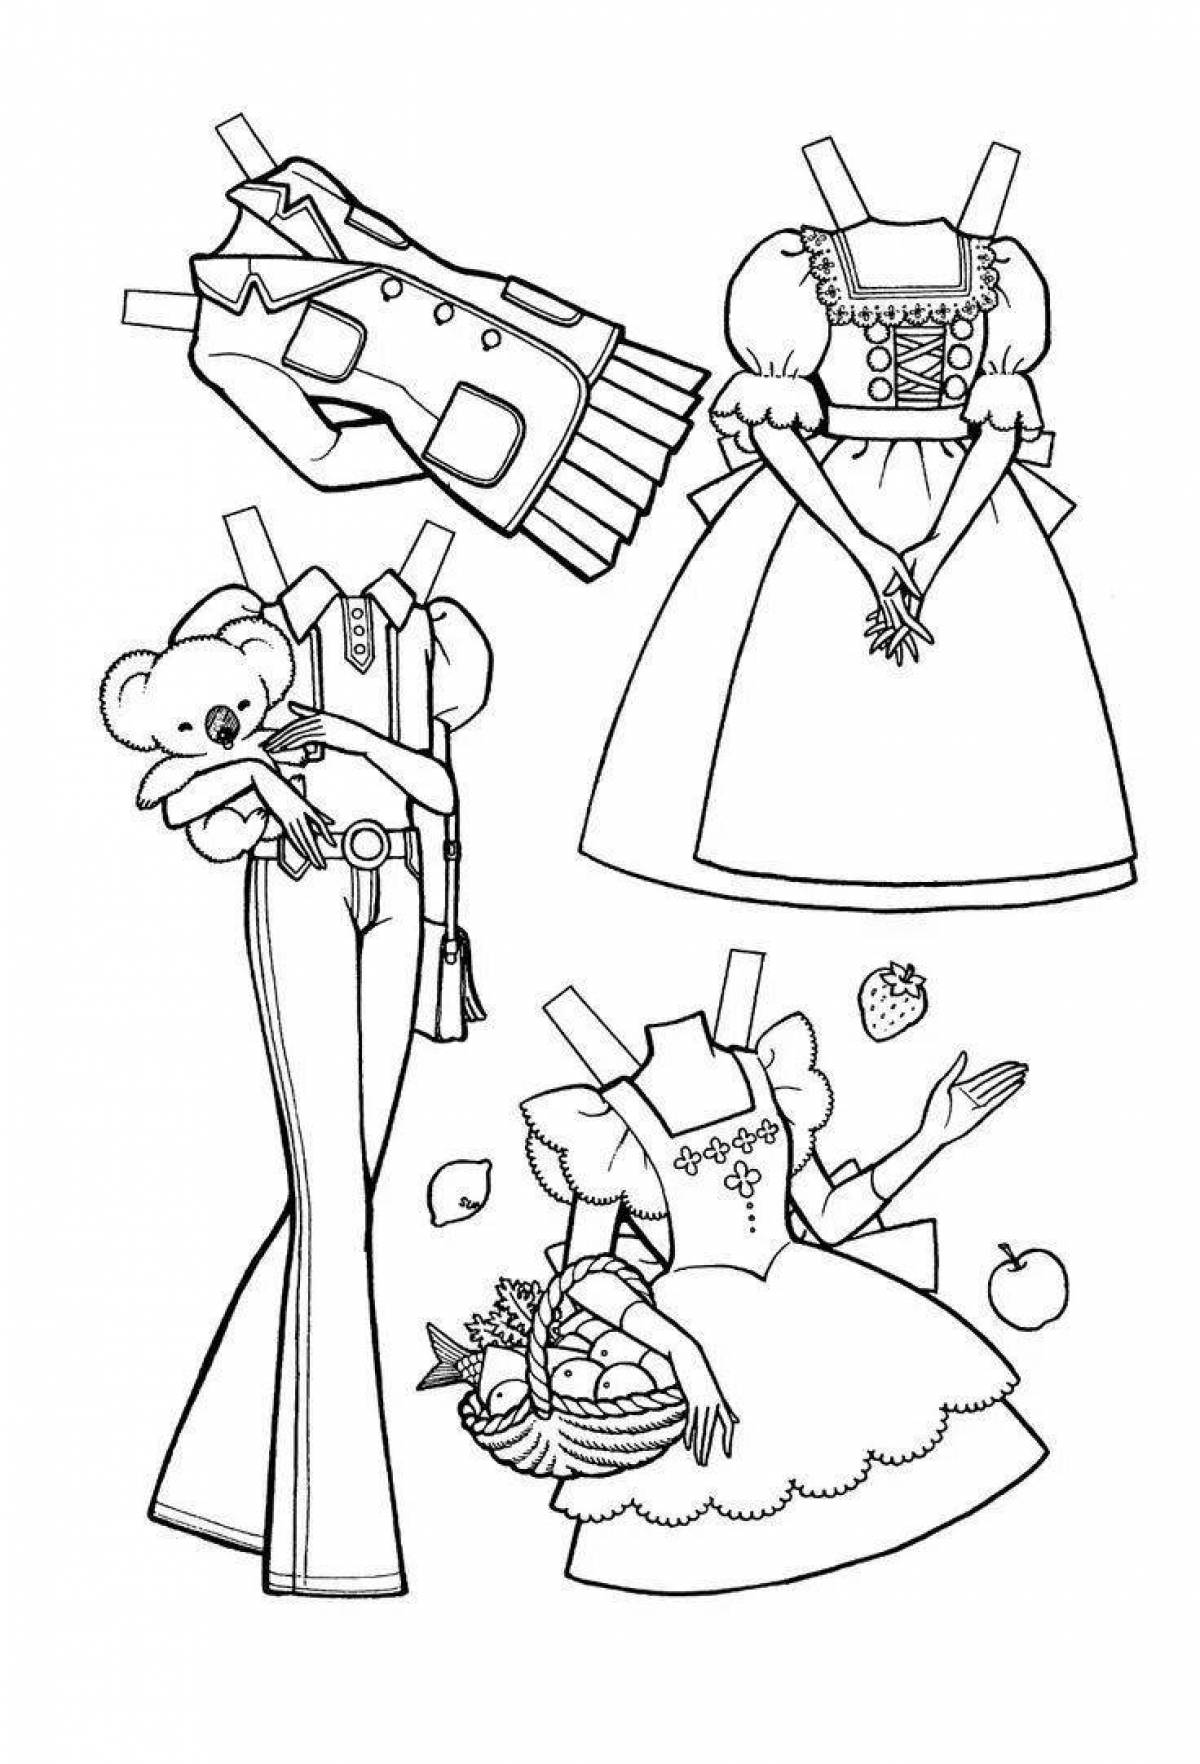 Coloring page adorable paper doll barbie